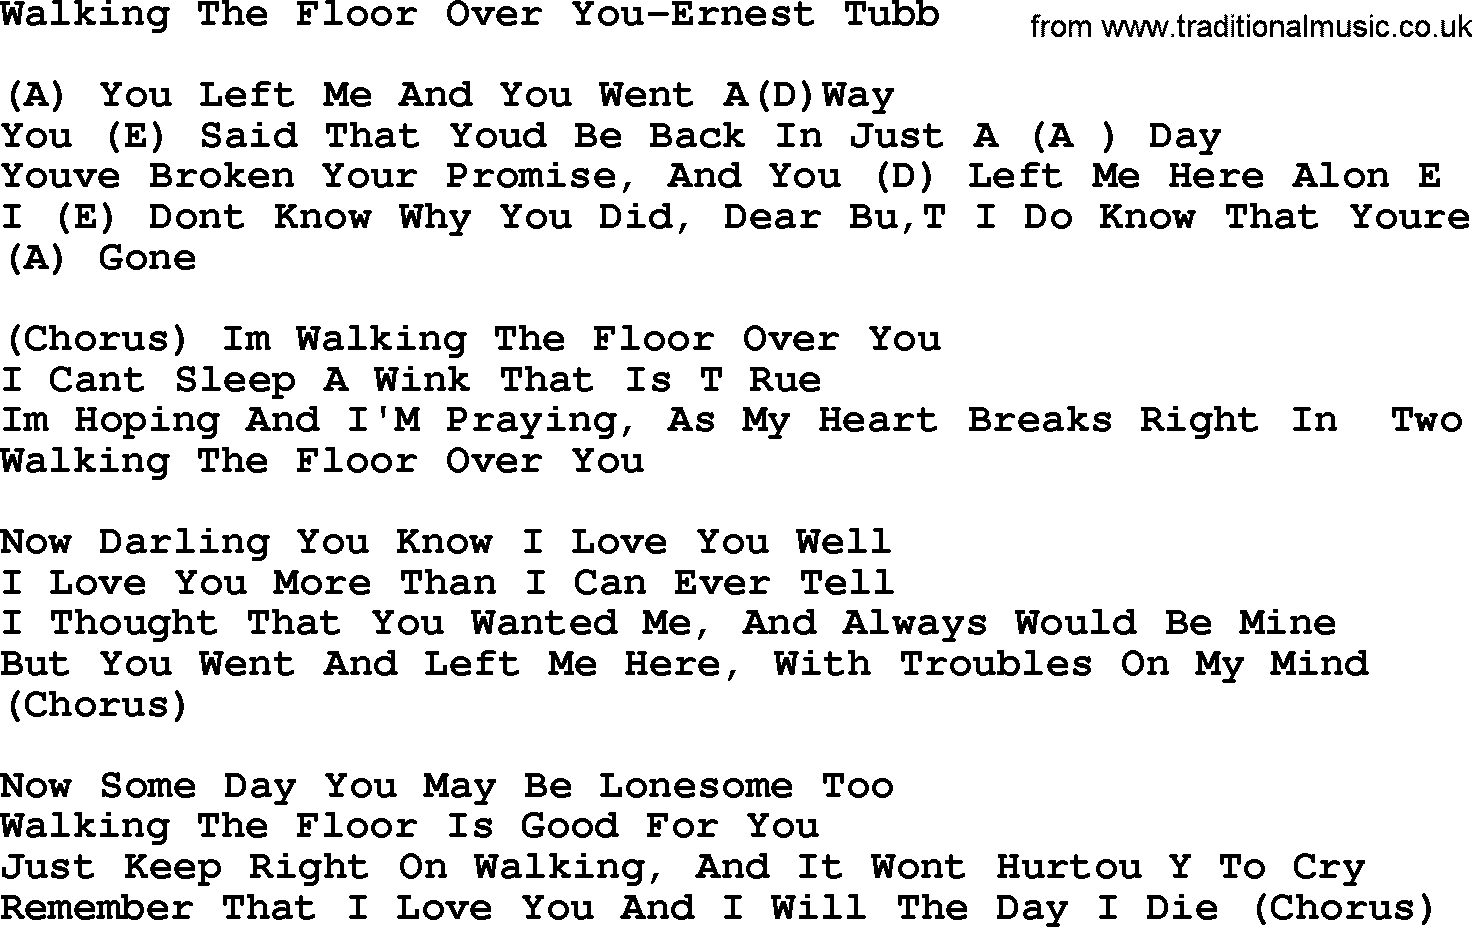 Country Music Walking The Floor Over You Ernest Tubb Lyrics And Chords